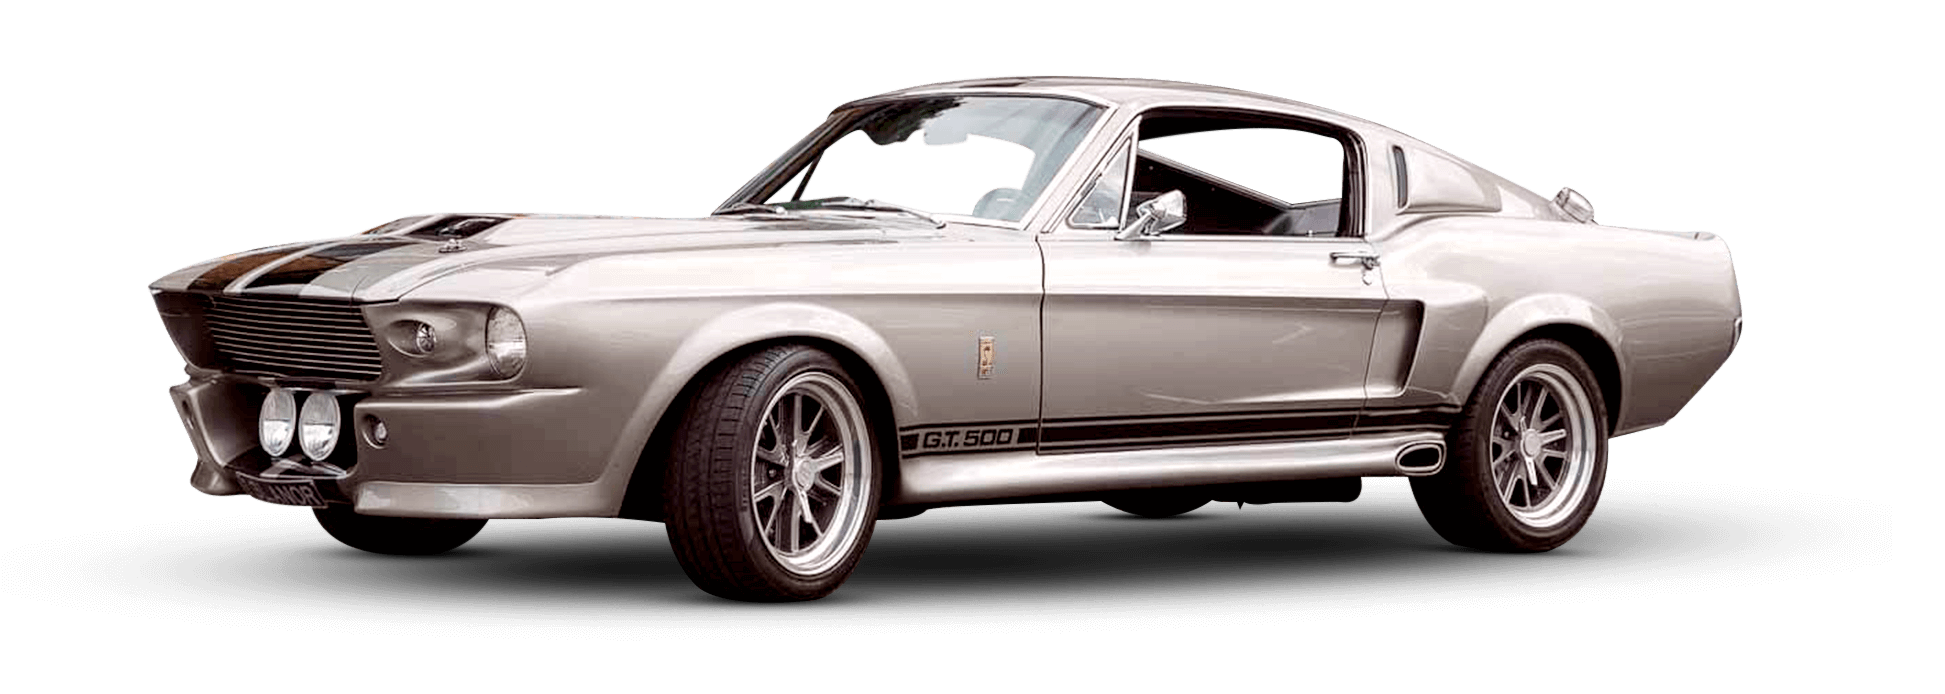 Silver Mustang GT500